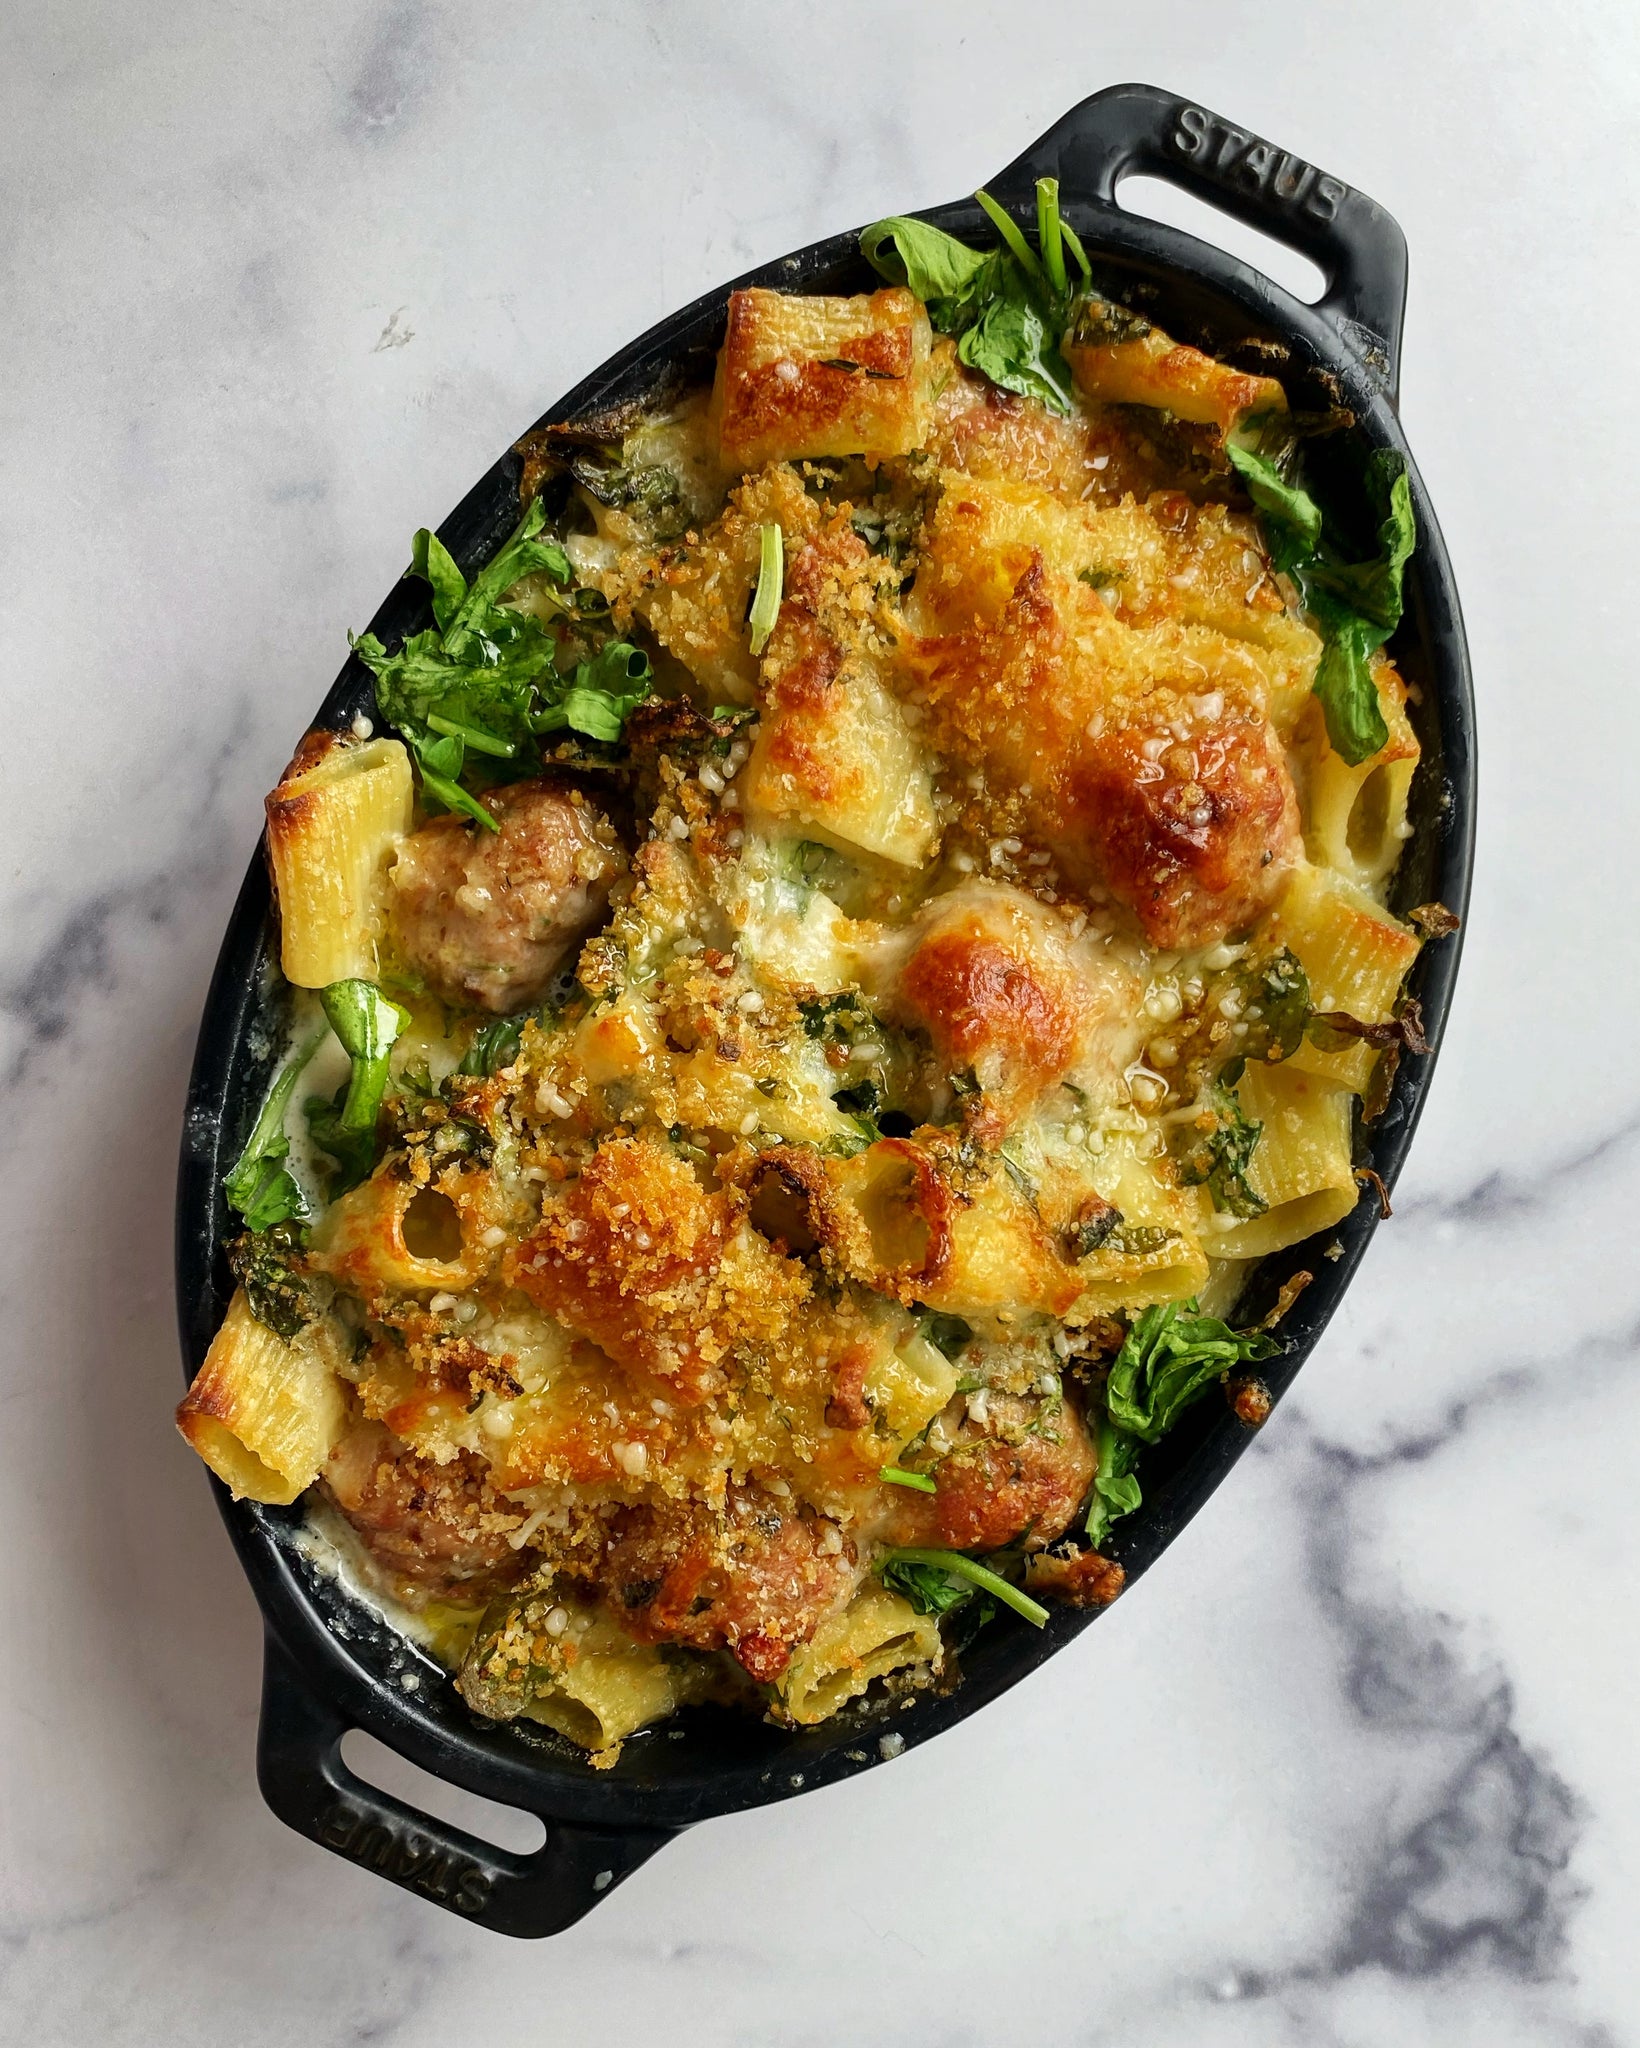 Baked Rigatoni with Arugula and Provolone